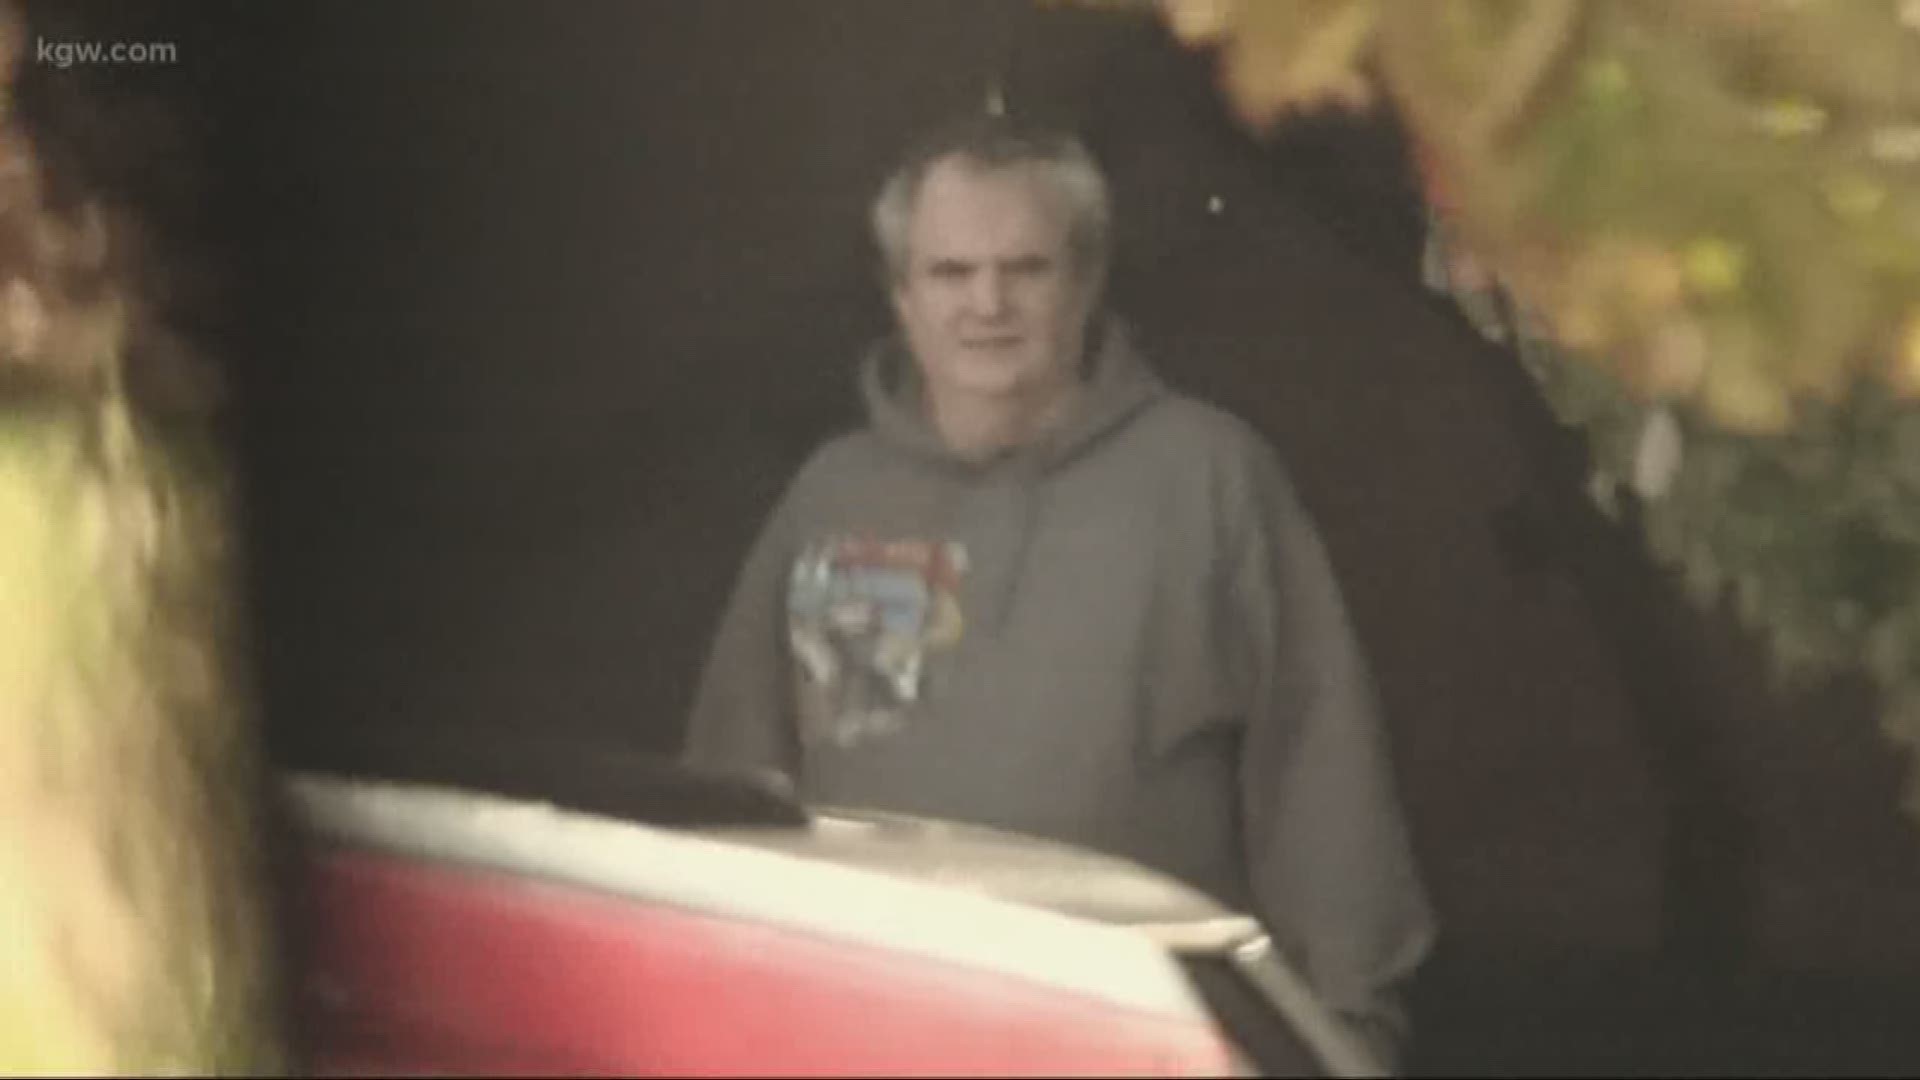 A KGW investigation found more than a dozen customers across the country have complained they were defrauded by the same man. Rodney Powell has a history of taking money for trailers and never delivering, according to records from the Oregon Attorney Gene